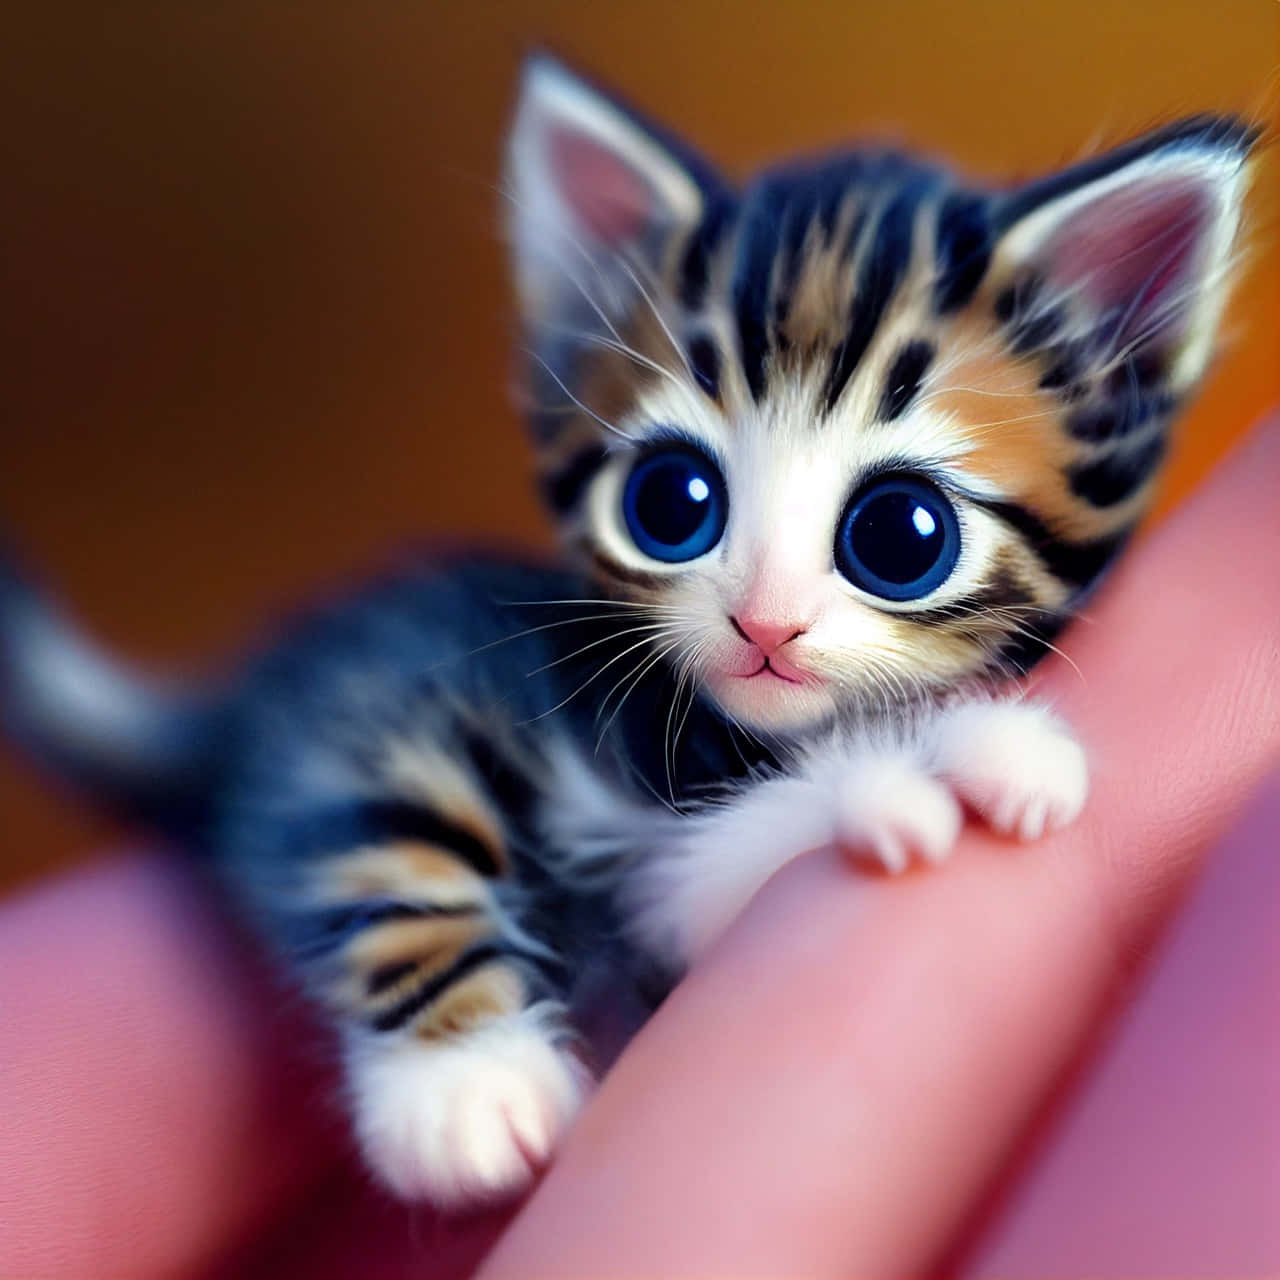 Look at This Adorable Little Kitty!